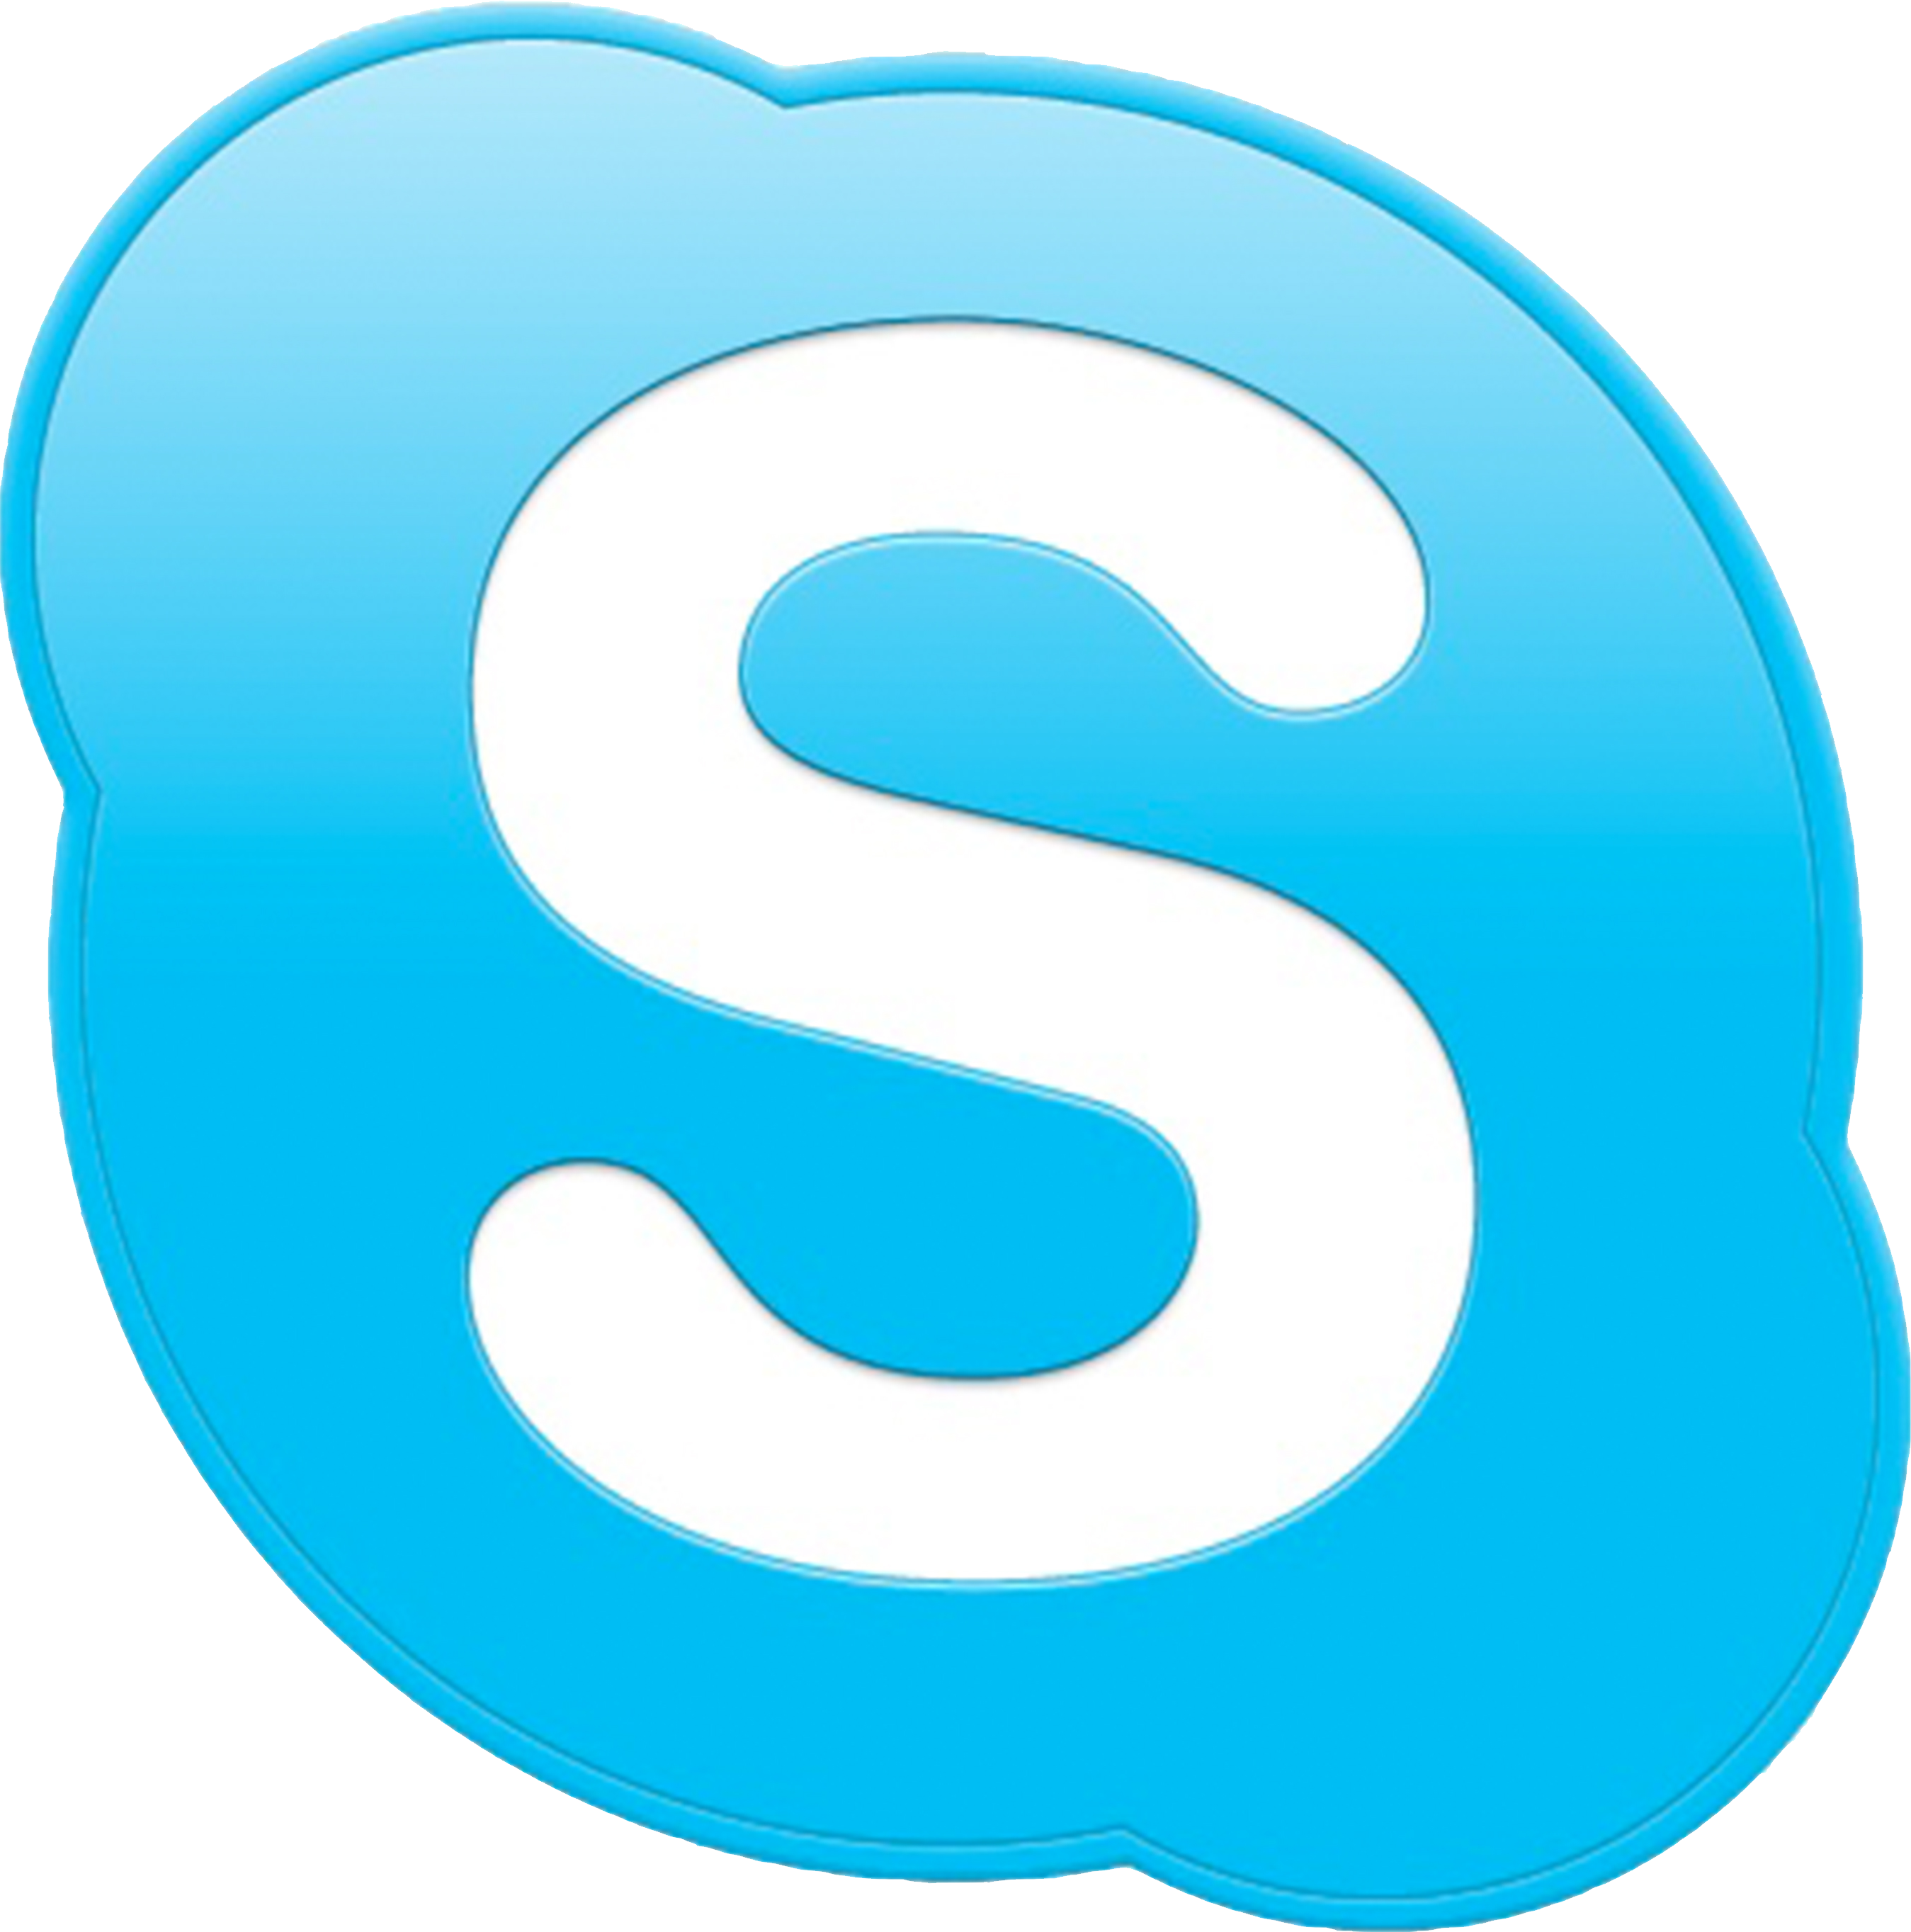 why does skype logo have arrows on it